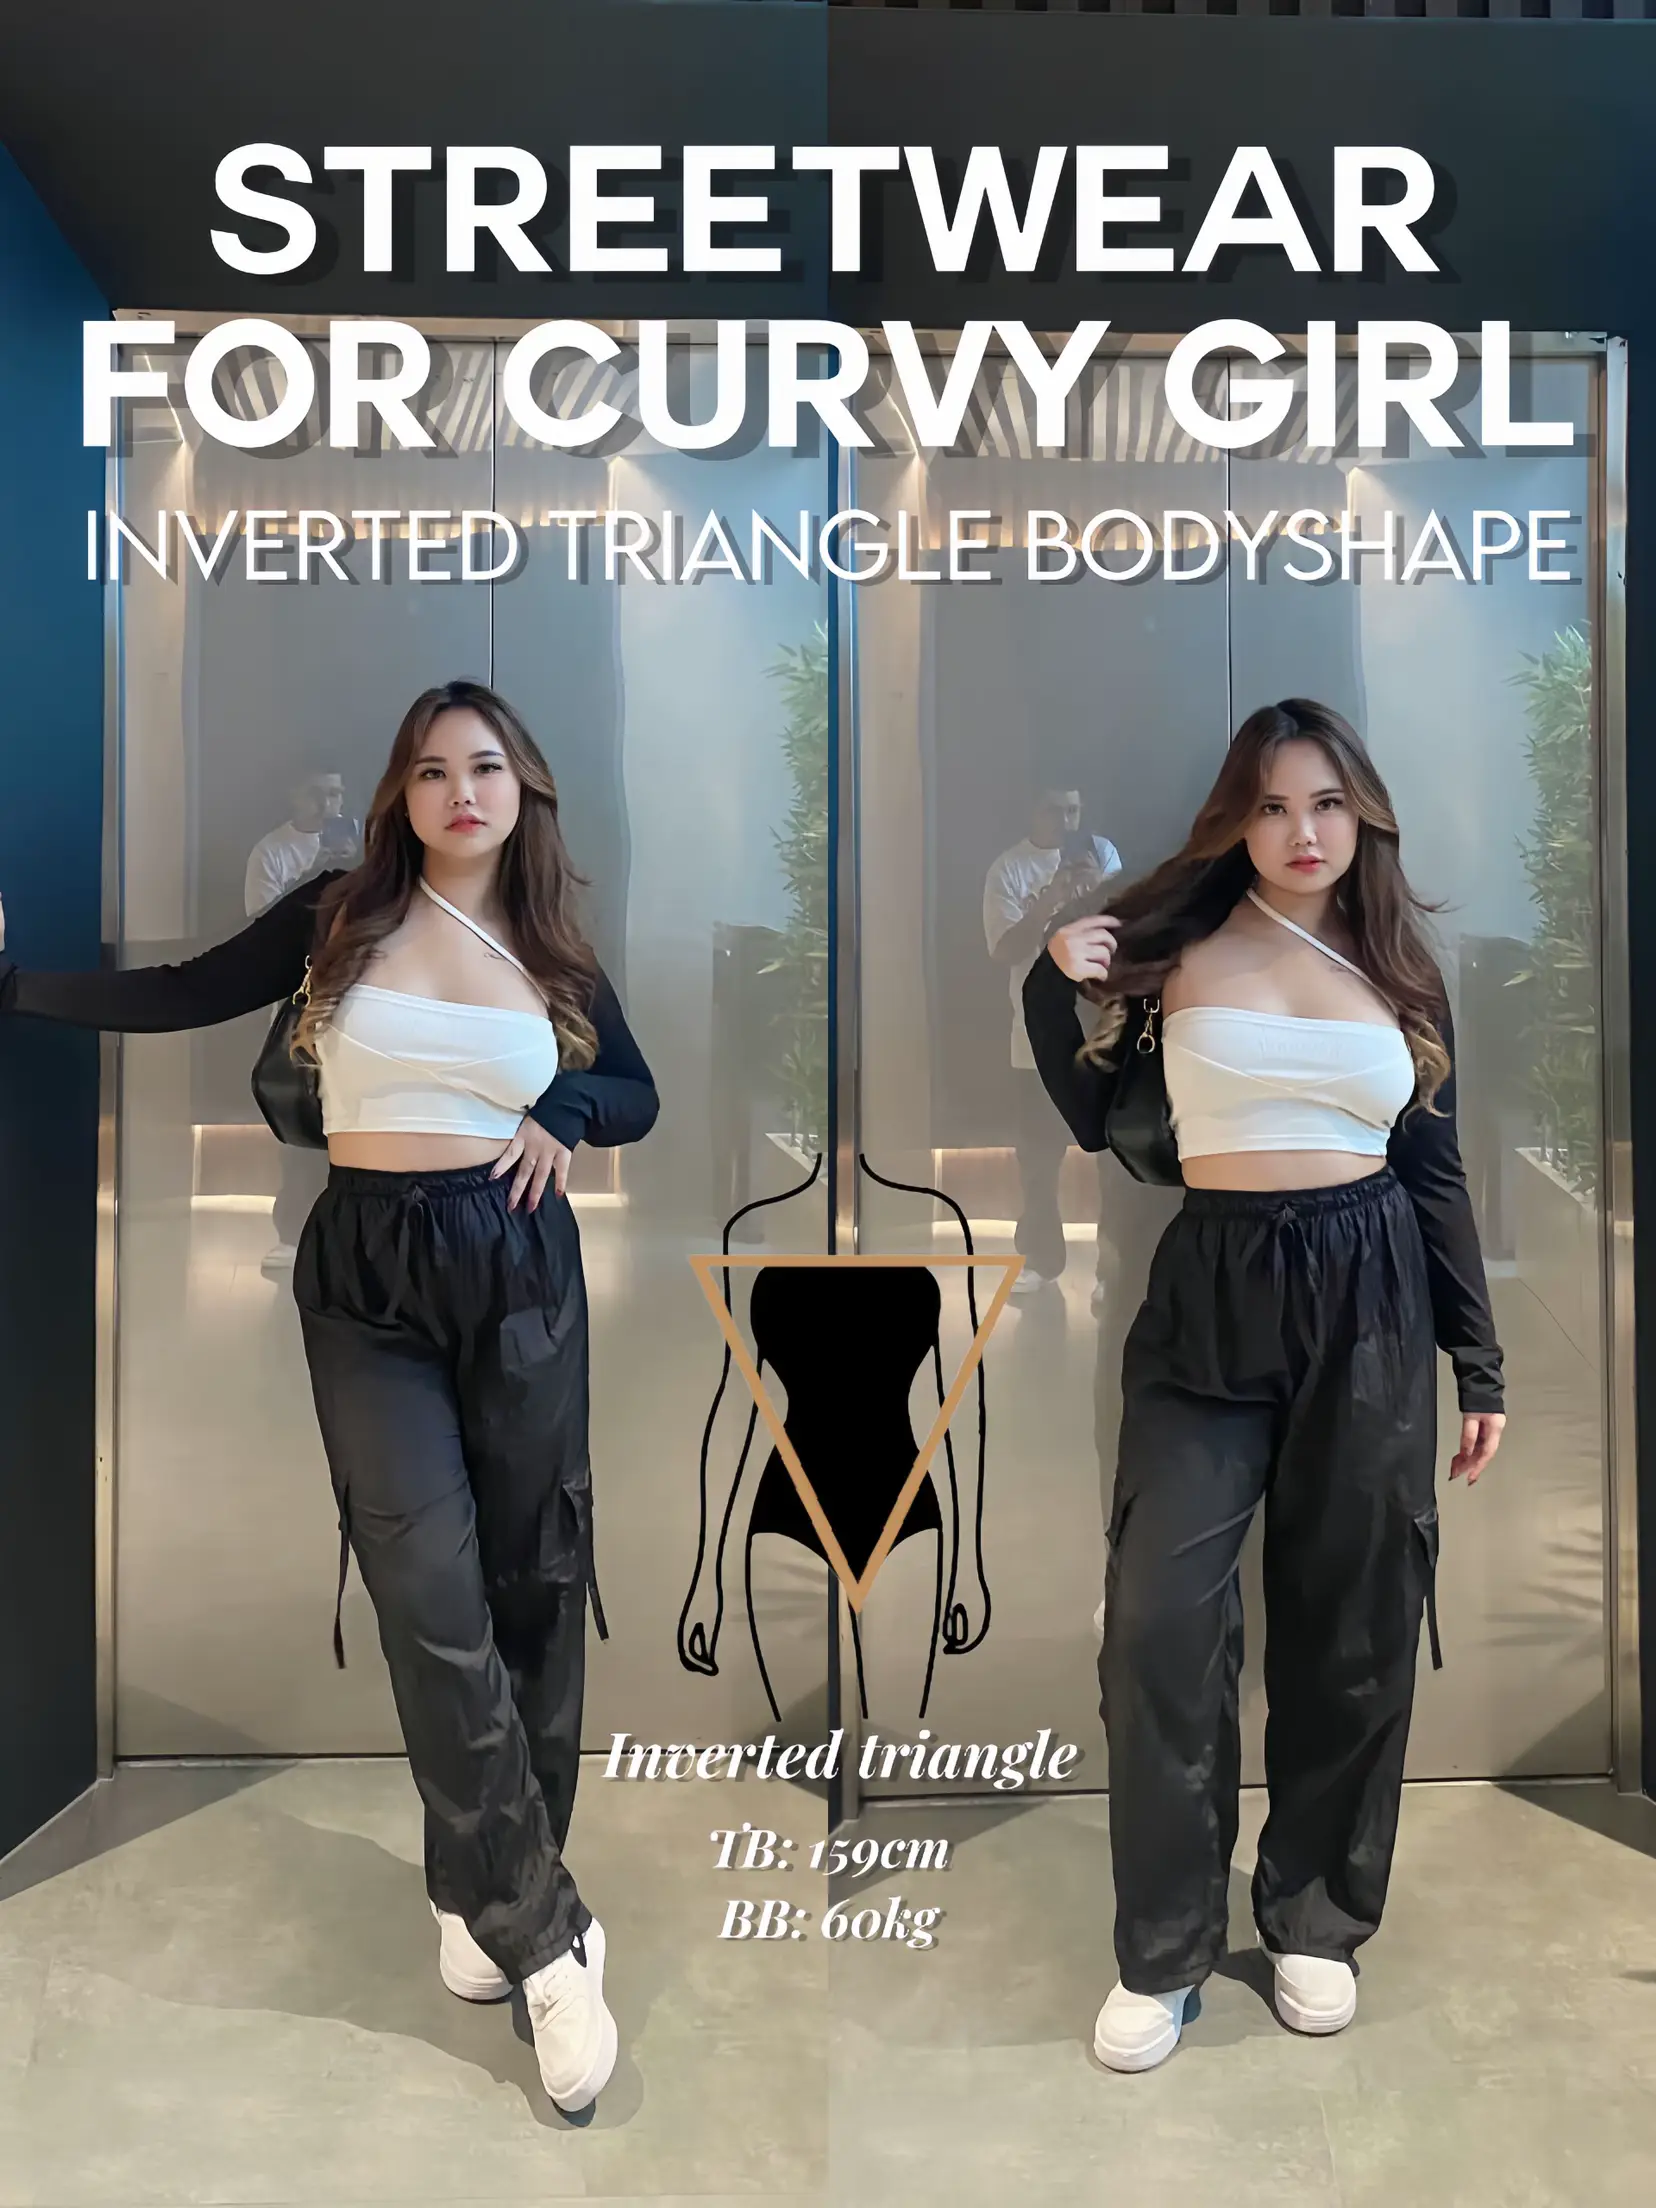 Streetwear for curvy girl who have inverted🔻